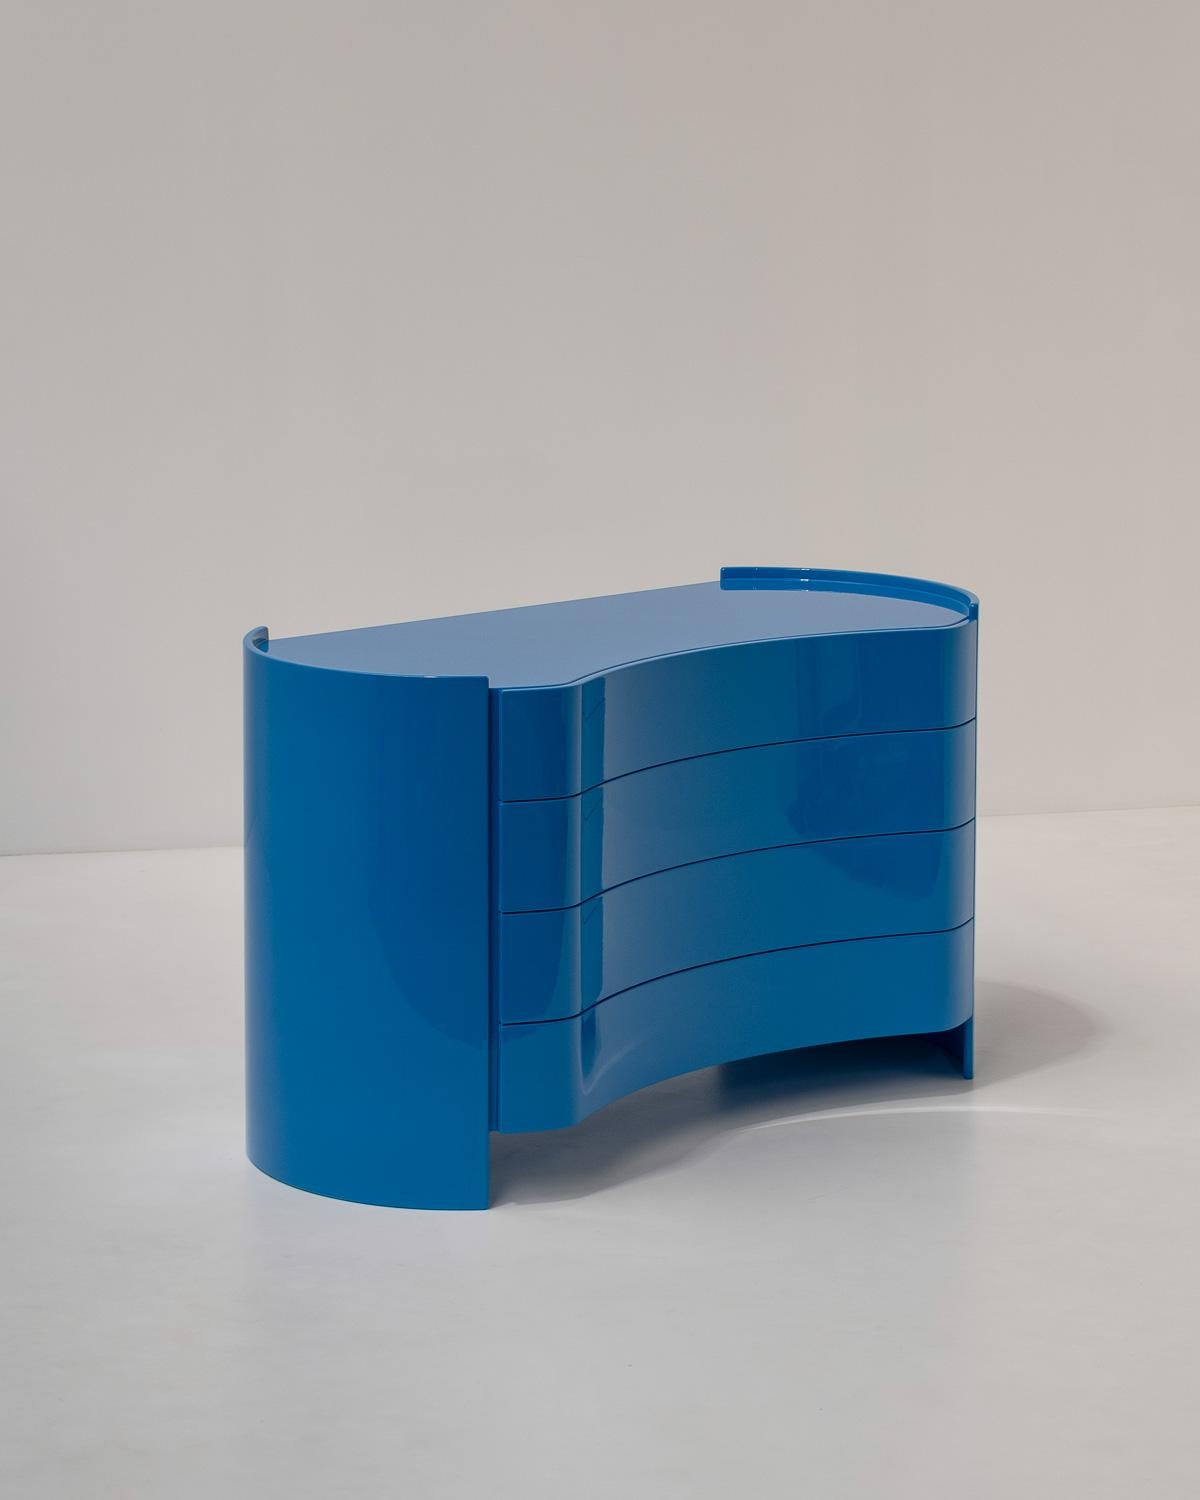 Curved 'Aiace' Chest of Drawers by Benatti, Italy 1960s

This Aiace chest of drawers by the Italian manufacturer Benatti is a stunning ode to 1960s design. 
Its vibrant sky-blue color adds a pop of energy to any room. The Italian craftsmanship